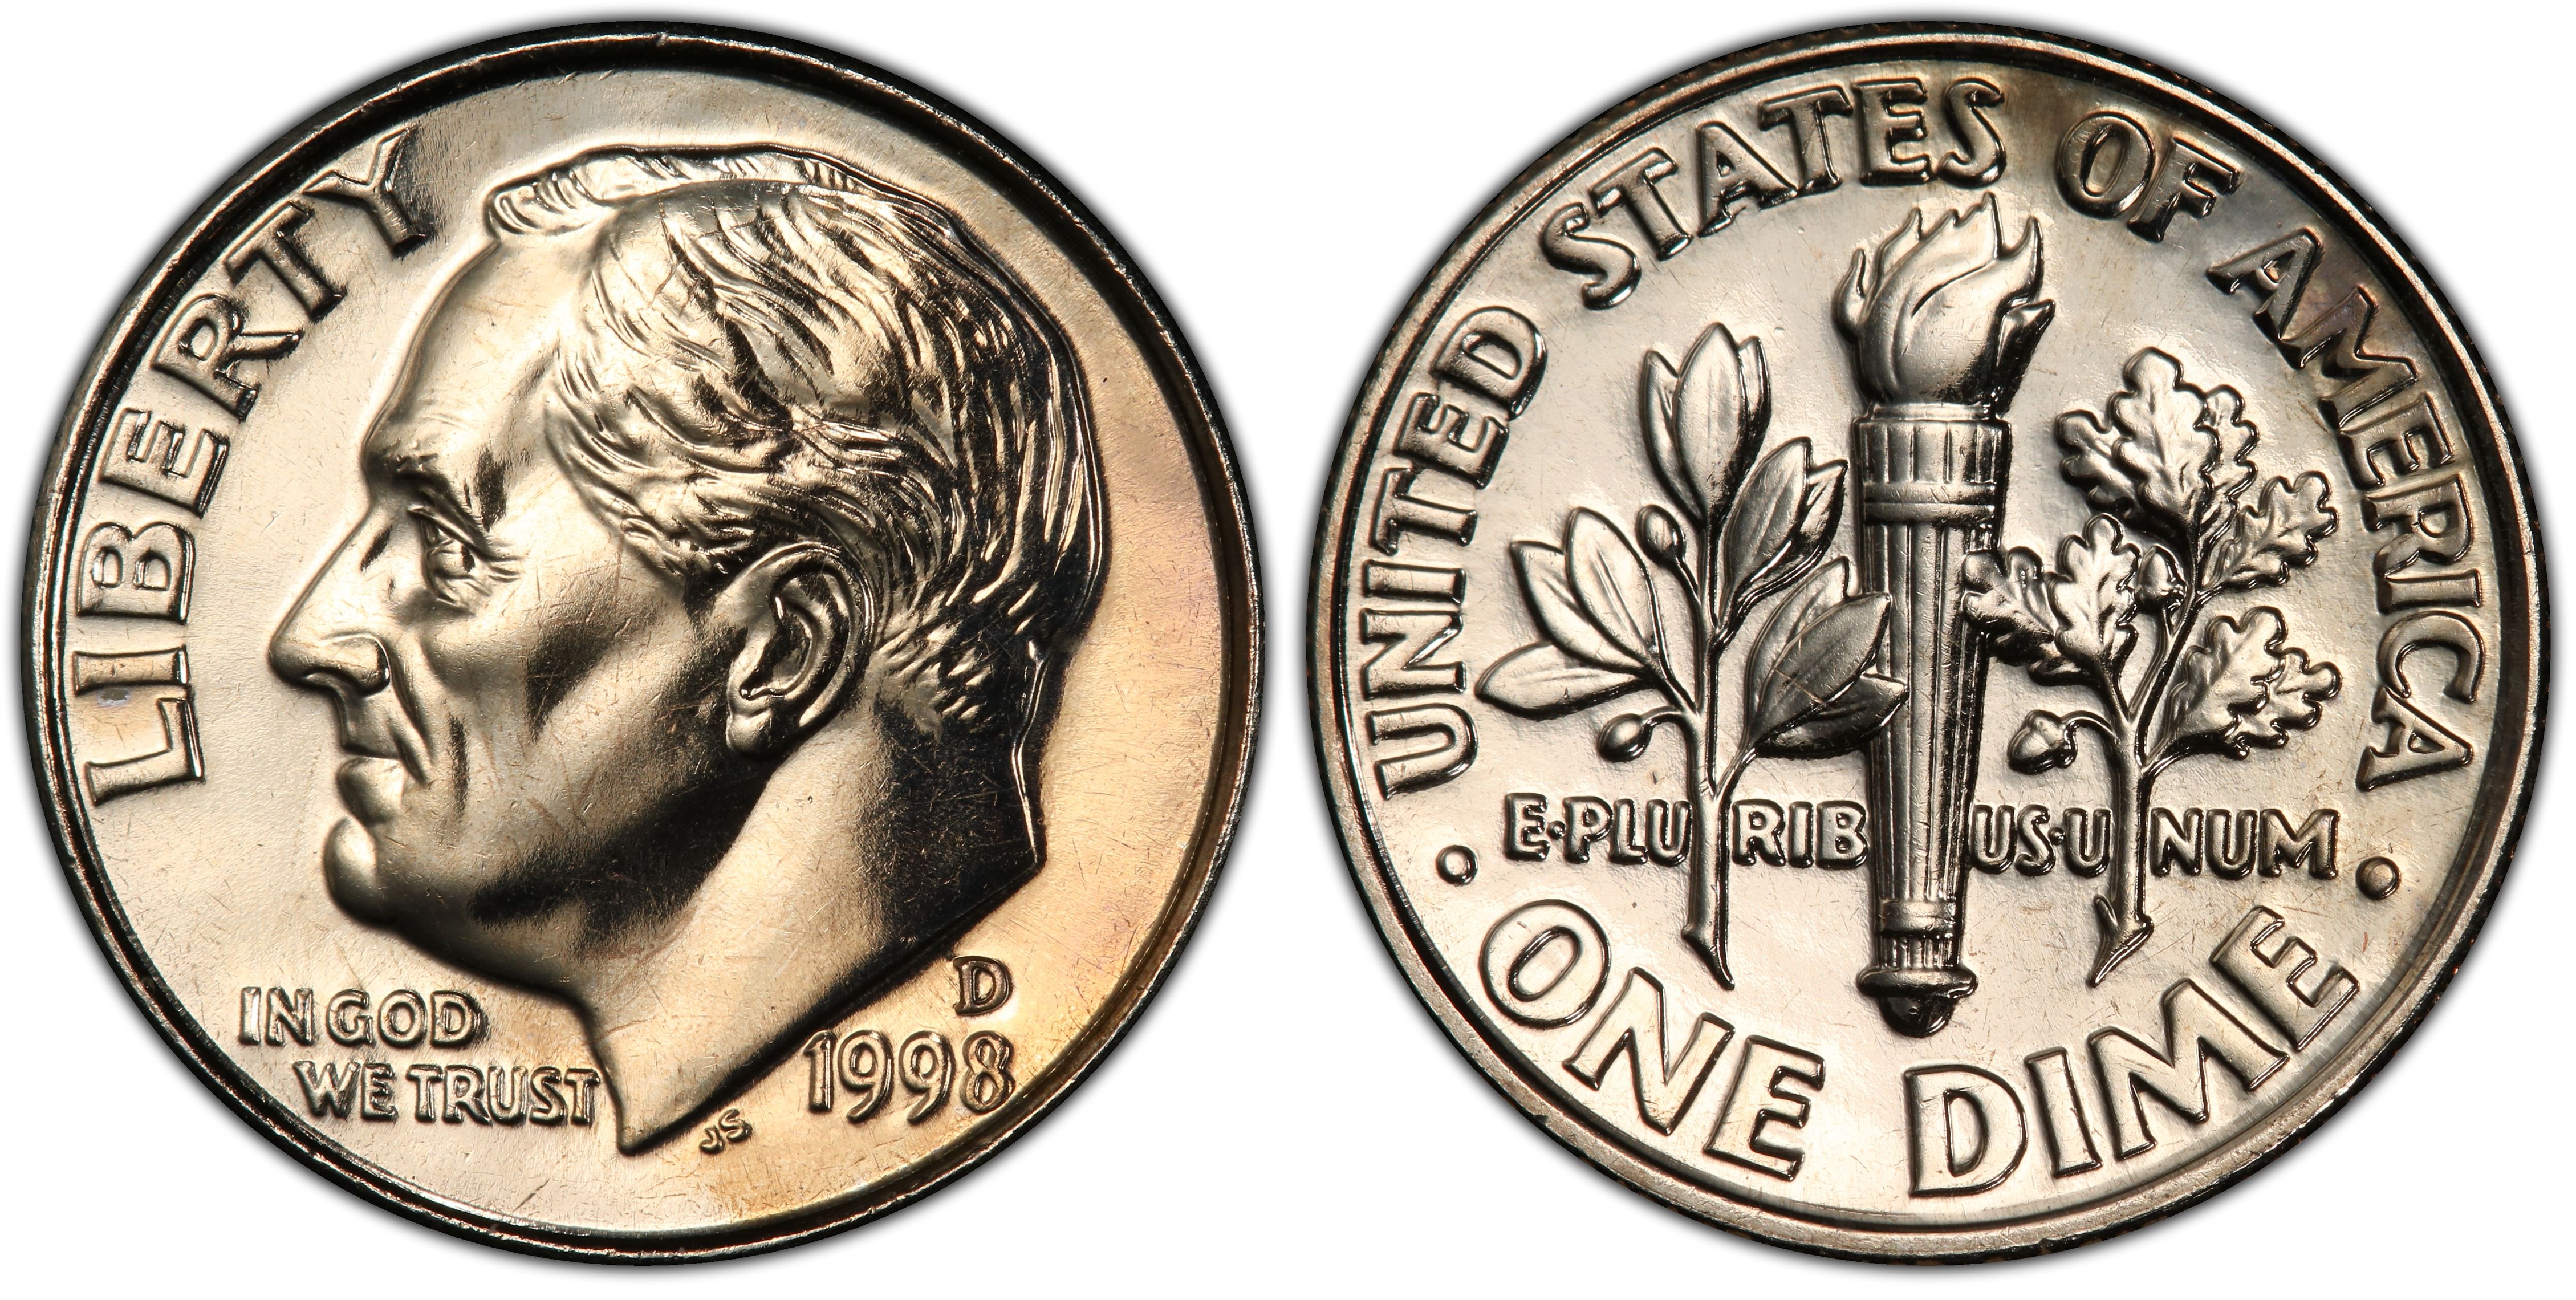 Details about   1998 P&D Roosevelt Dimes in BU condition 